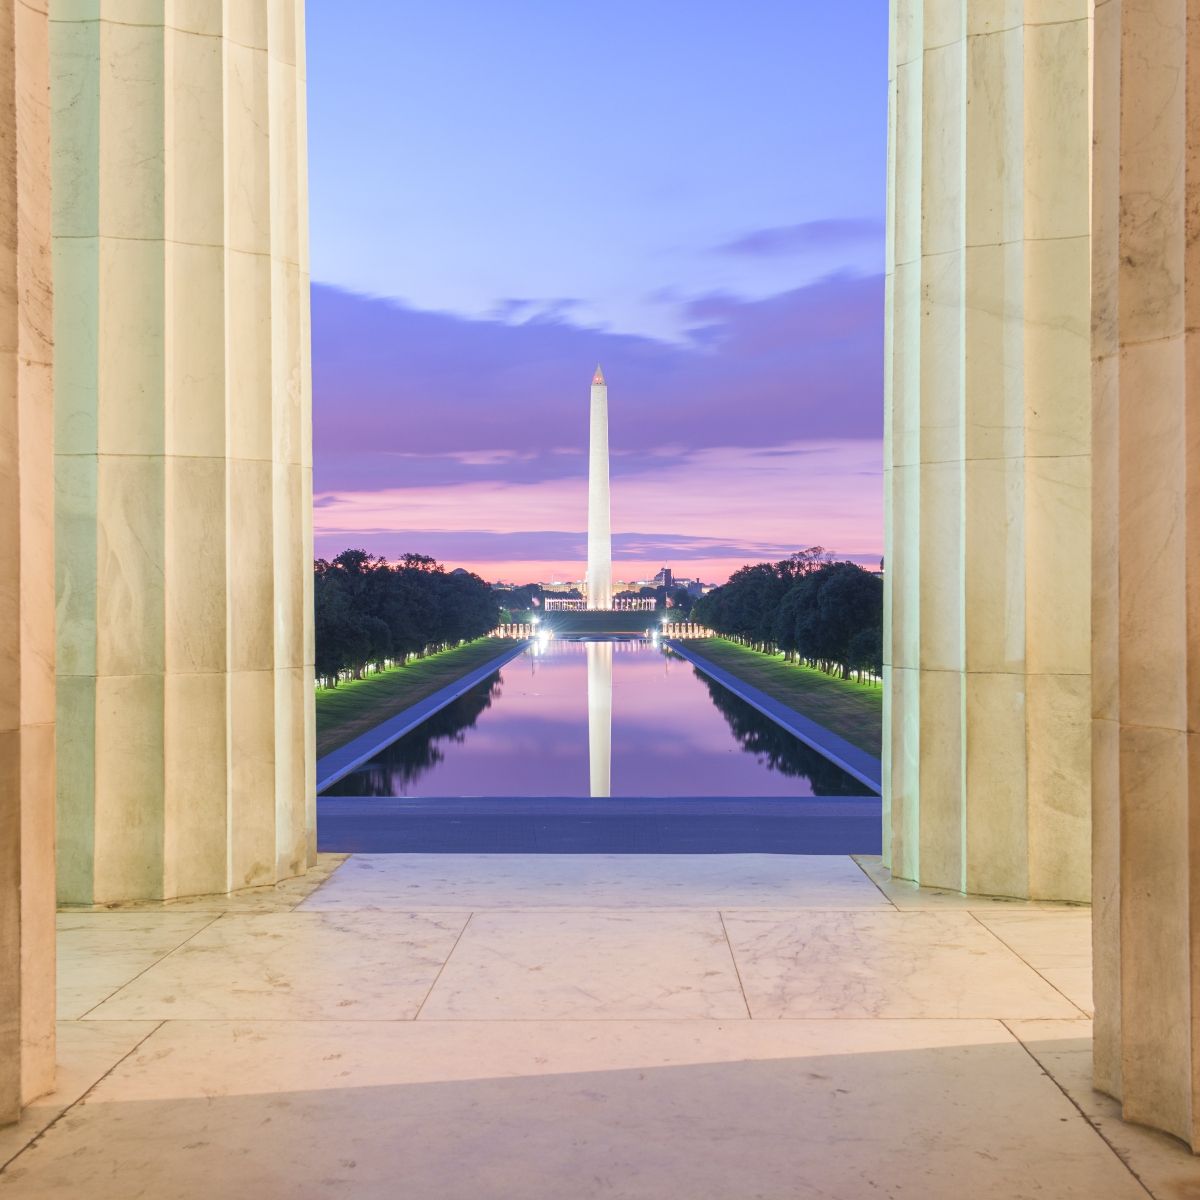 13-free-things-to-do-in-washington-d-c